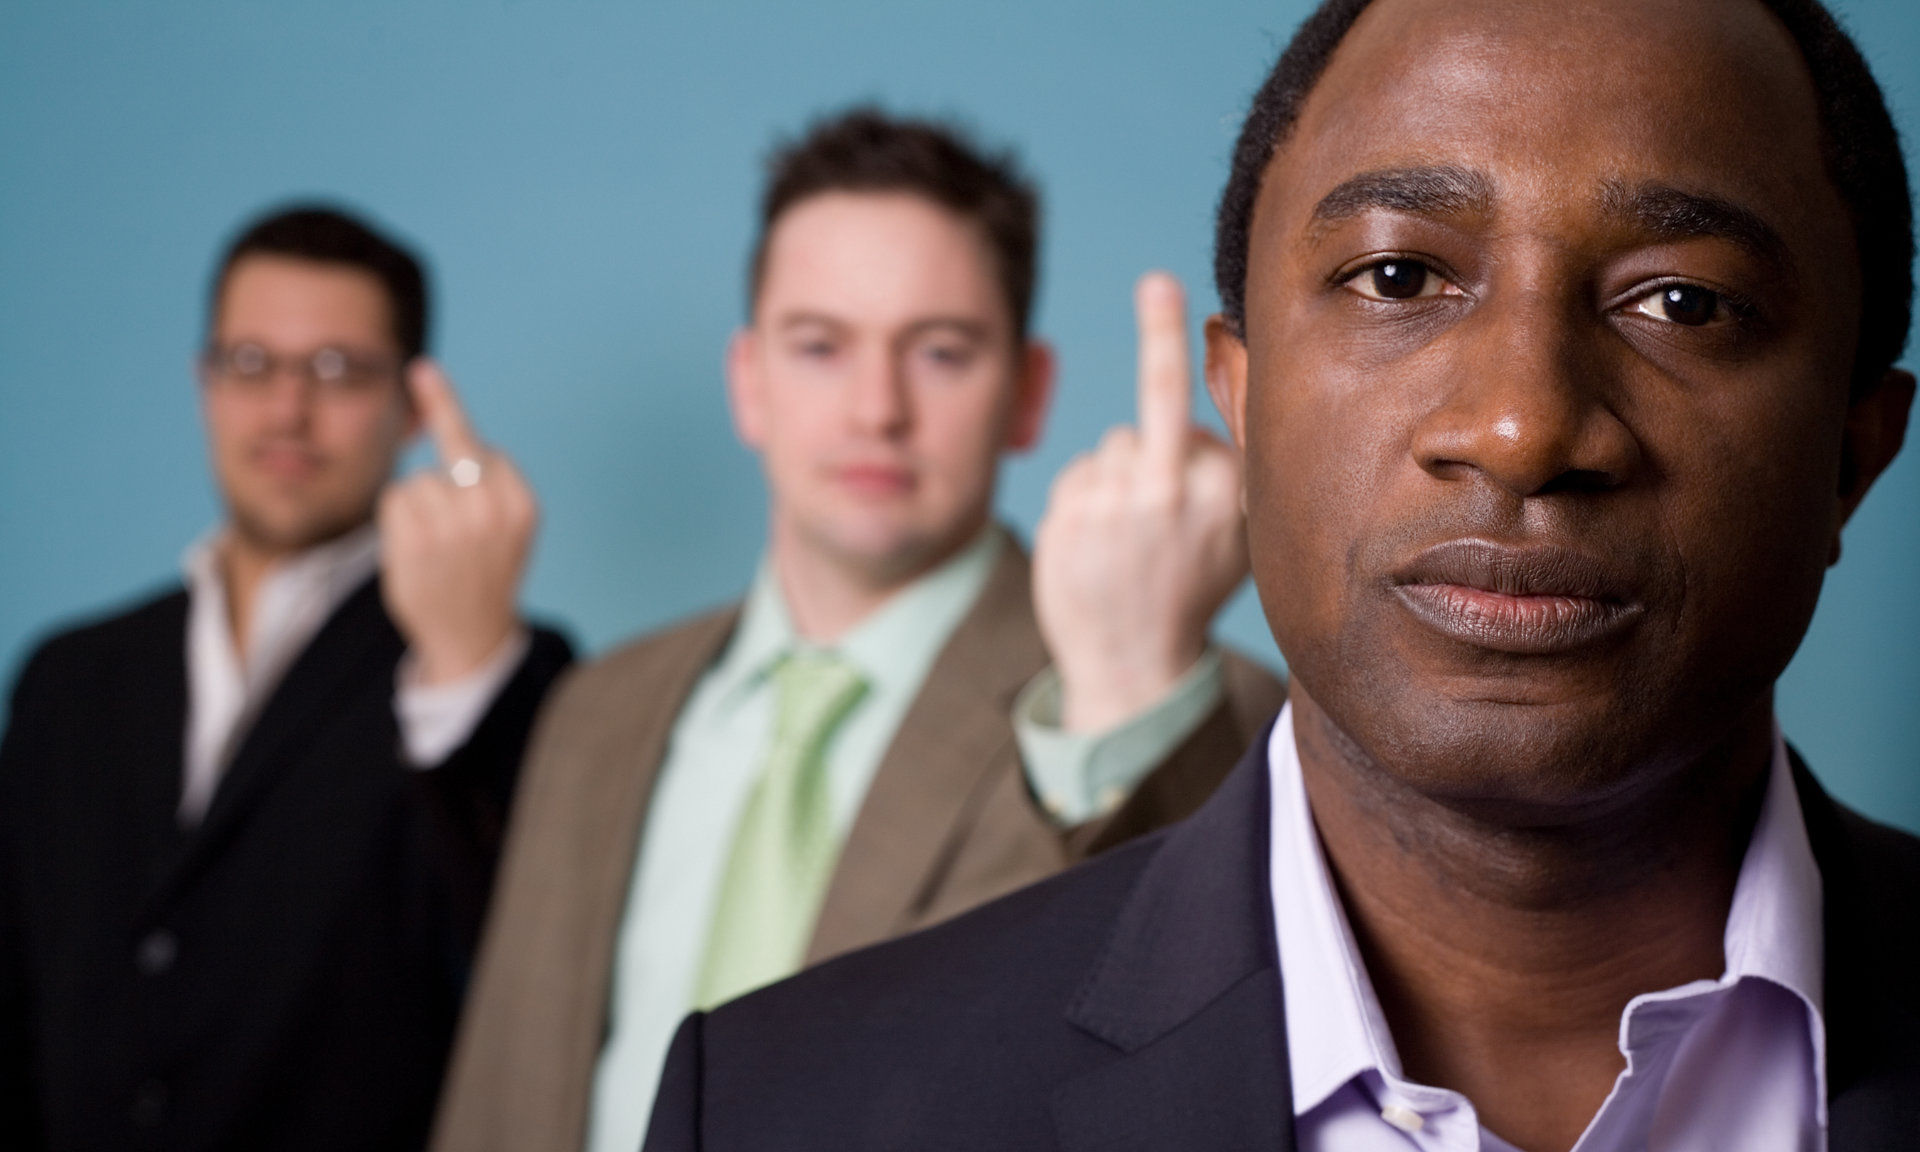 similarity between xenophobia and racism in the workplace